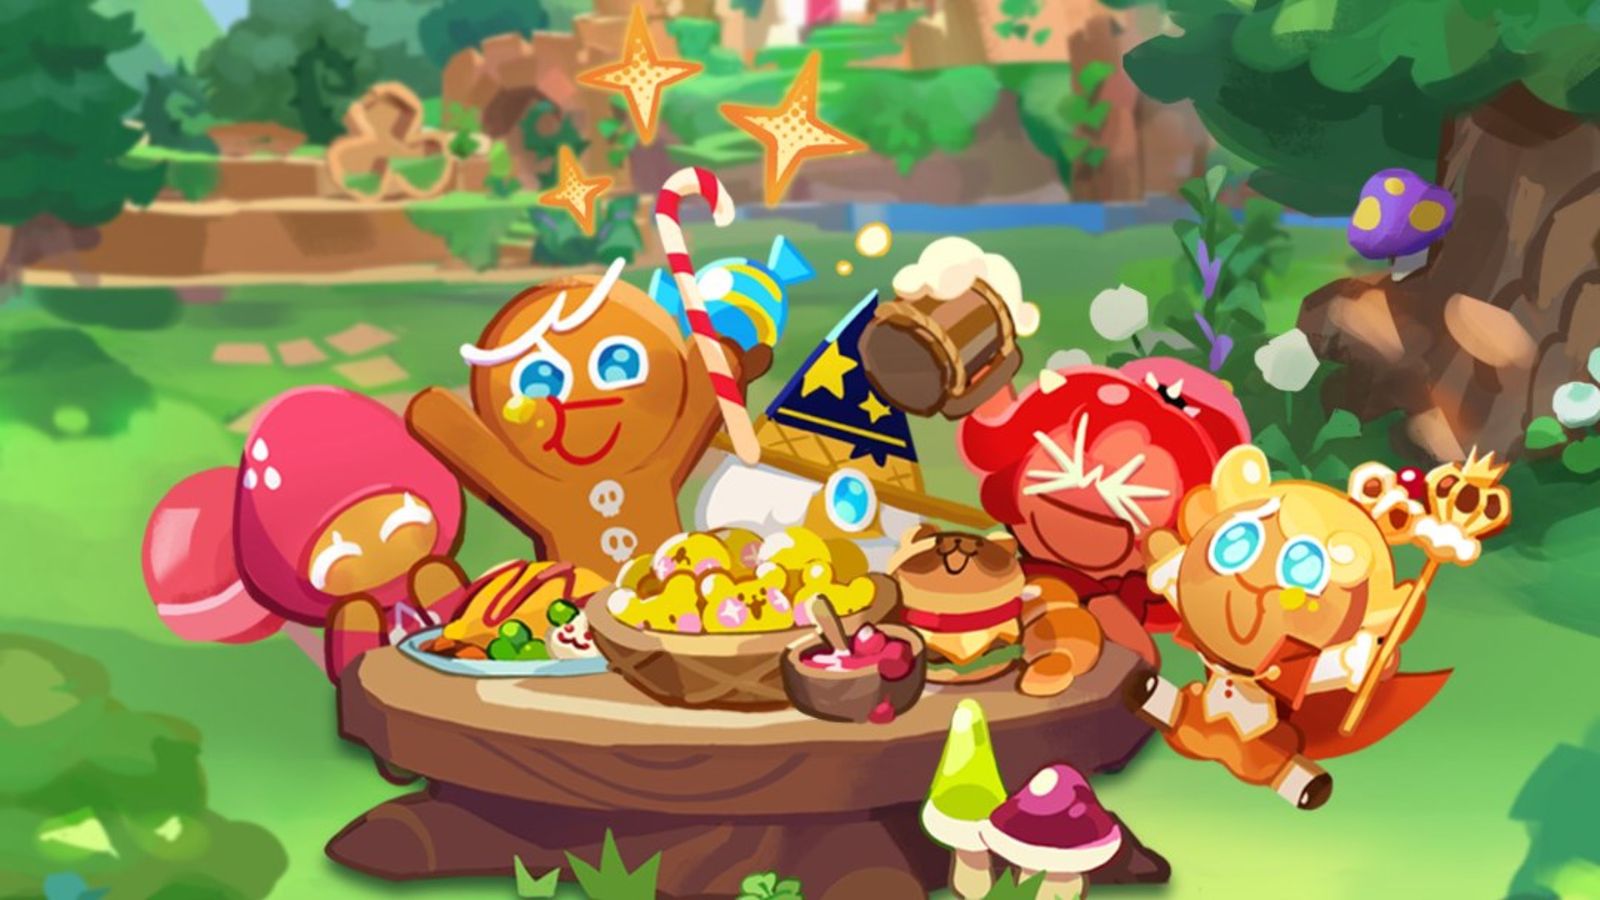 Screenshot from Cookie Run: Kingdom, showing four cookies having a picnic